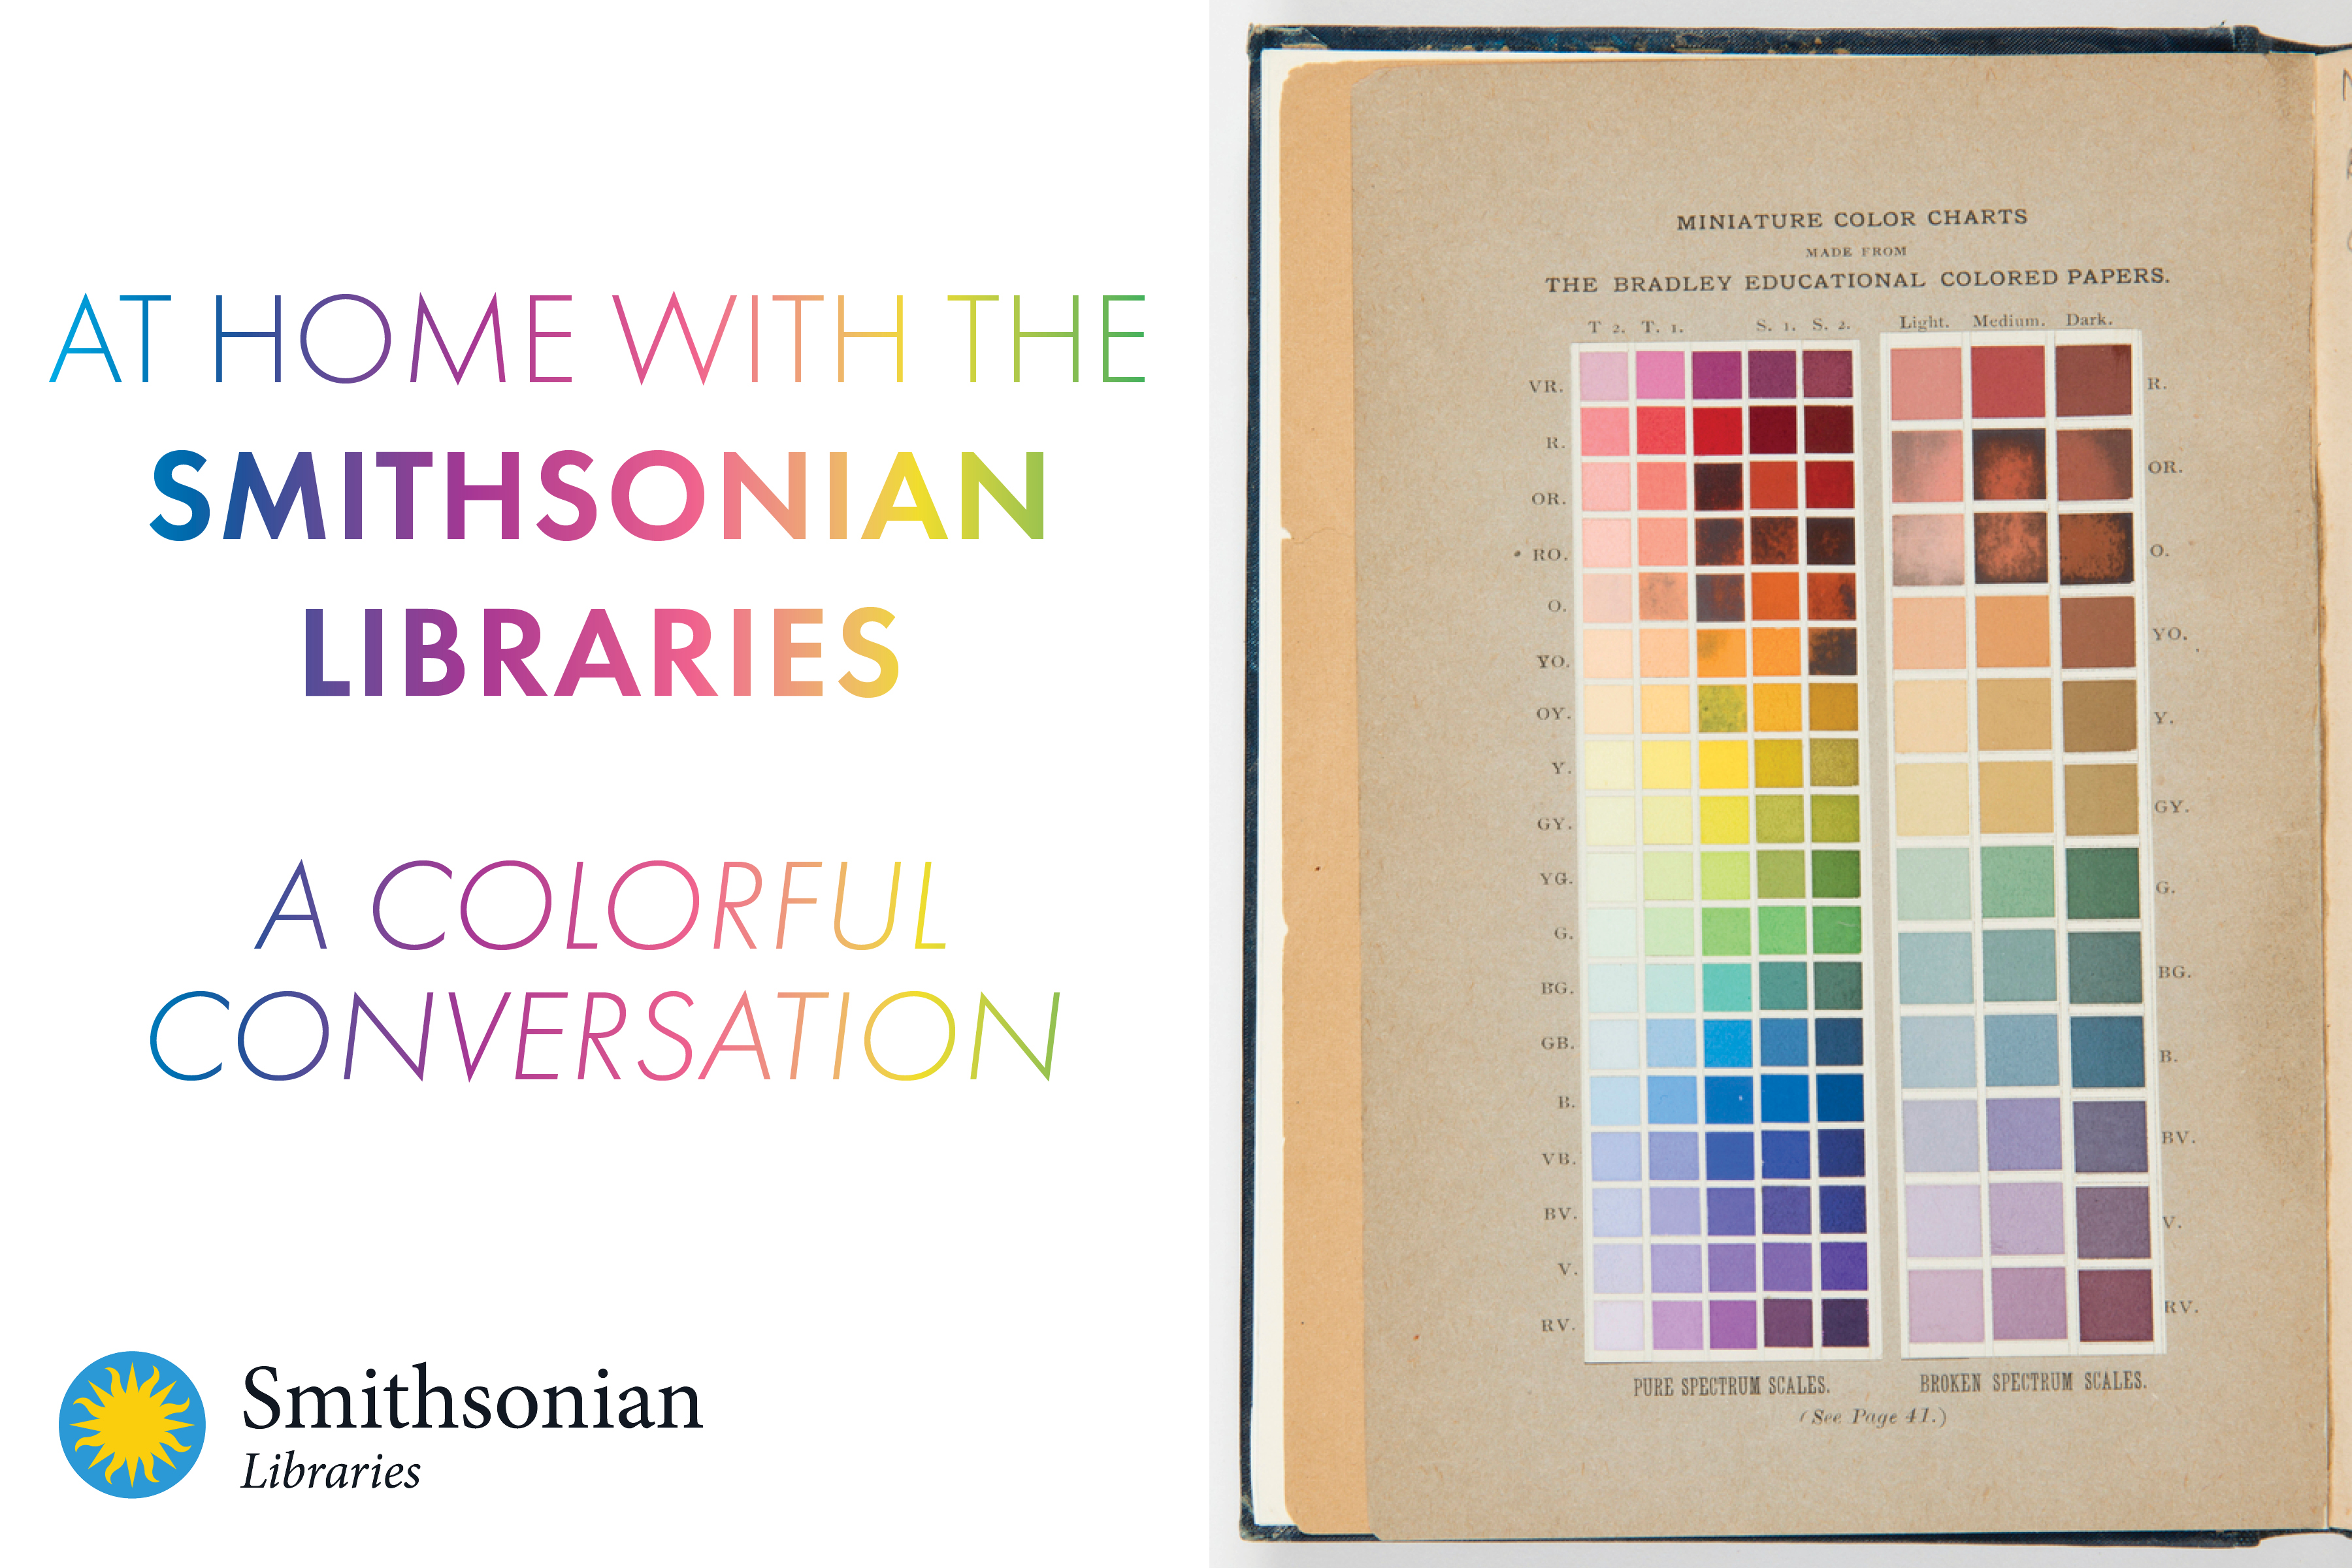 At Home with the Smithsonian Libraries: A Colorful Conversation